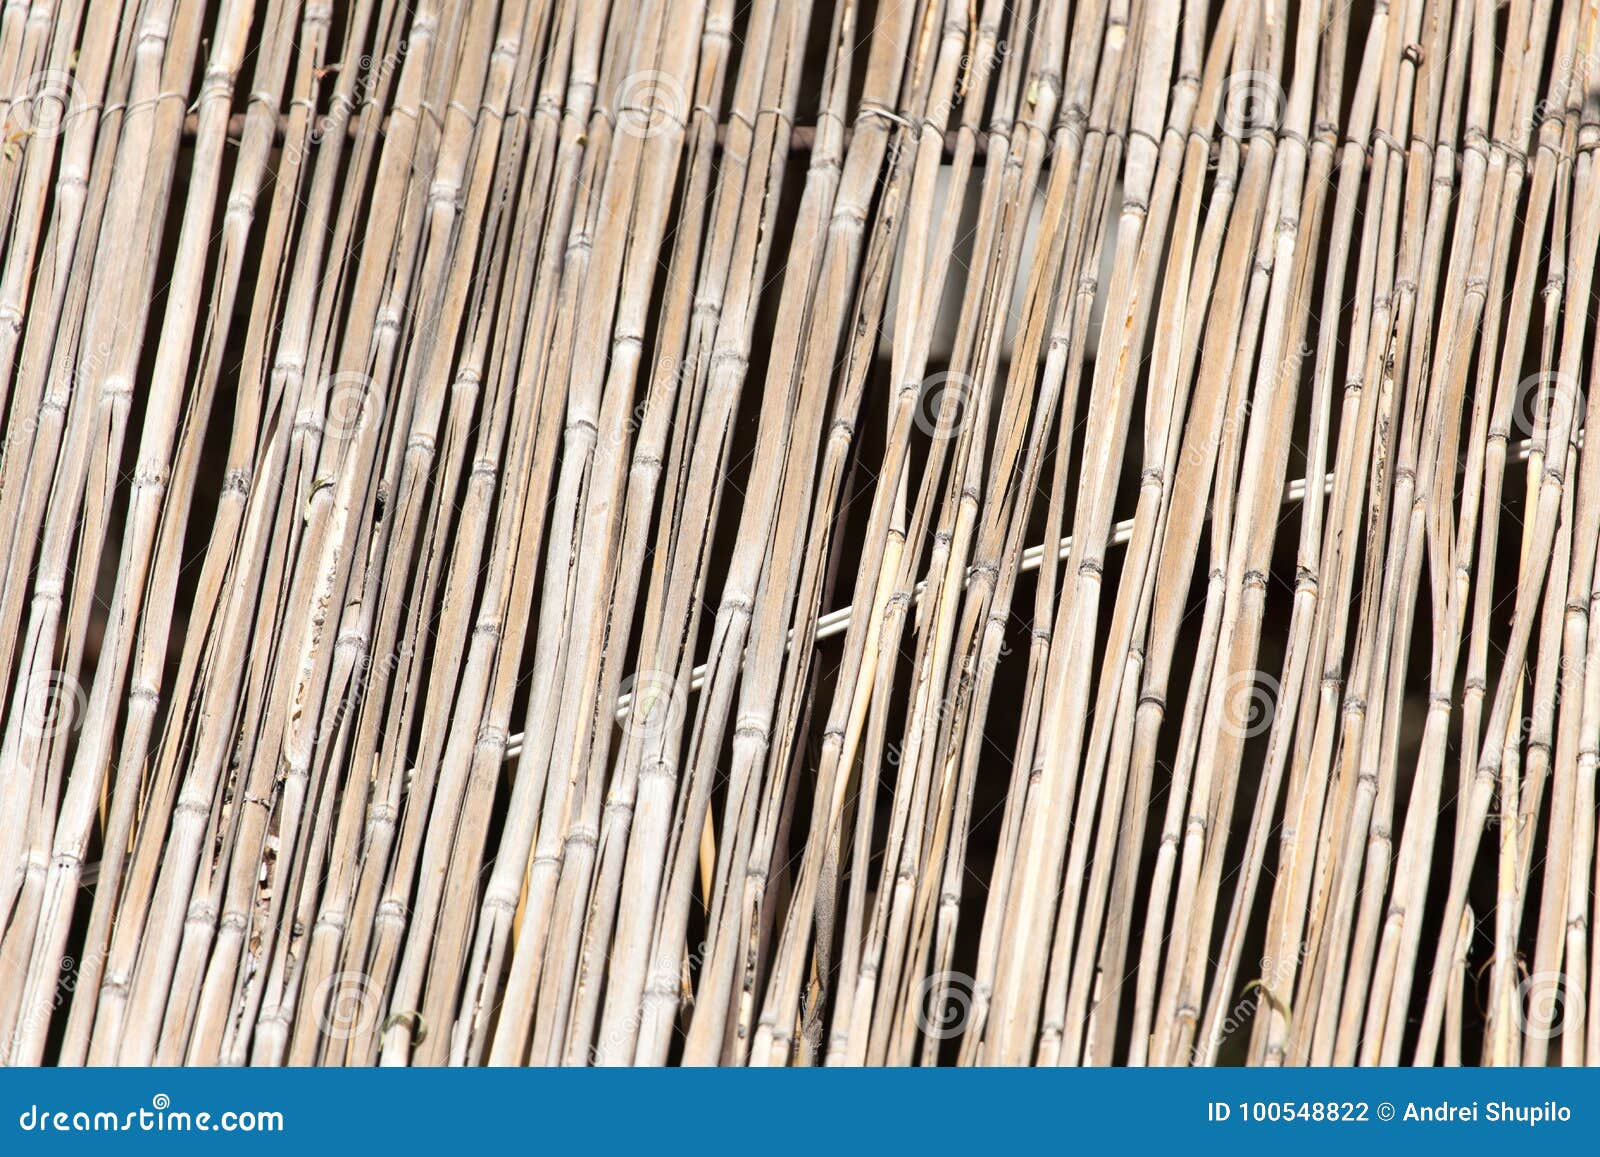  Japanese Bamboo Texture  Good For Background Stock Photo 